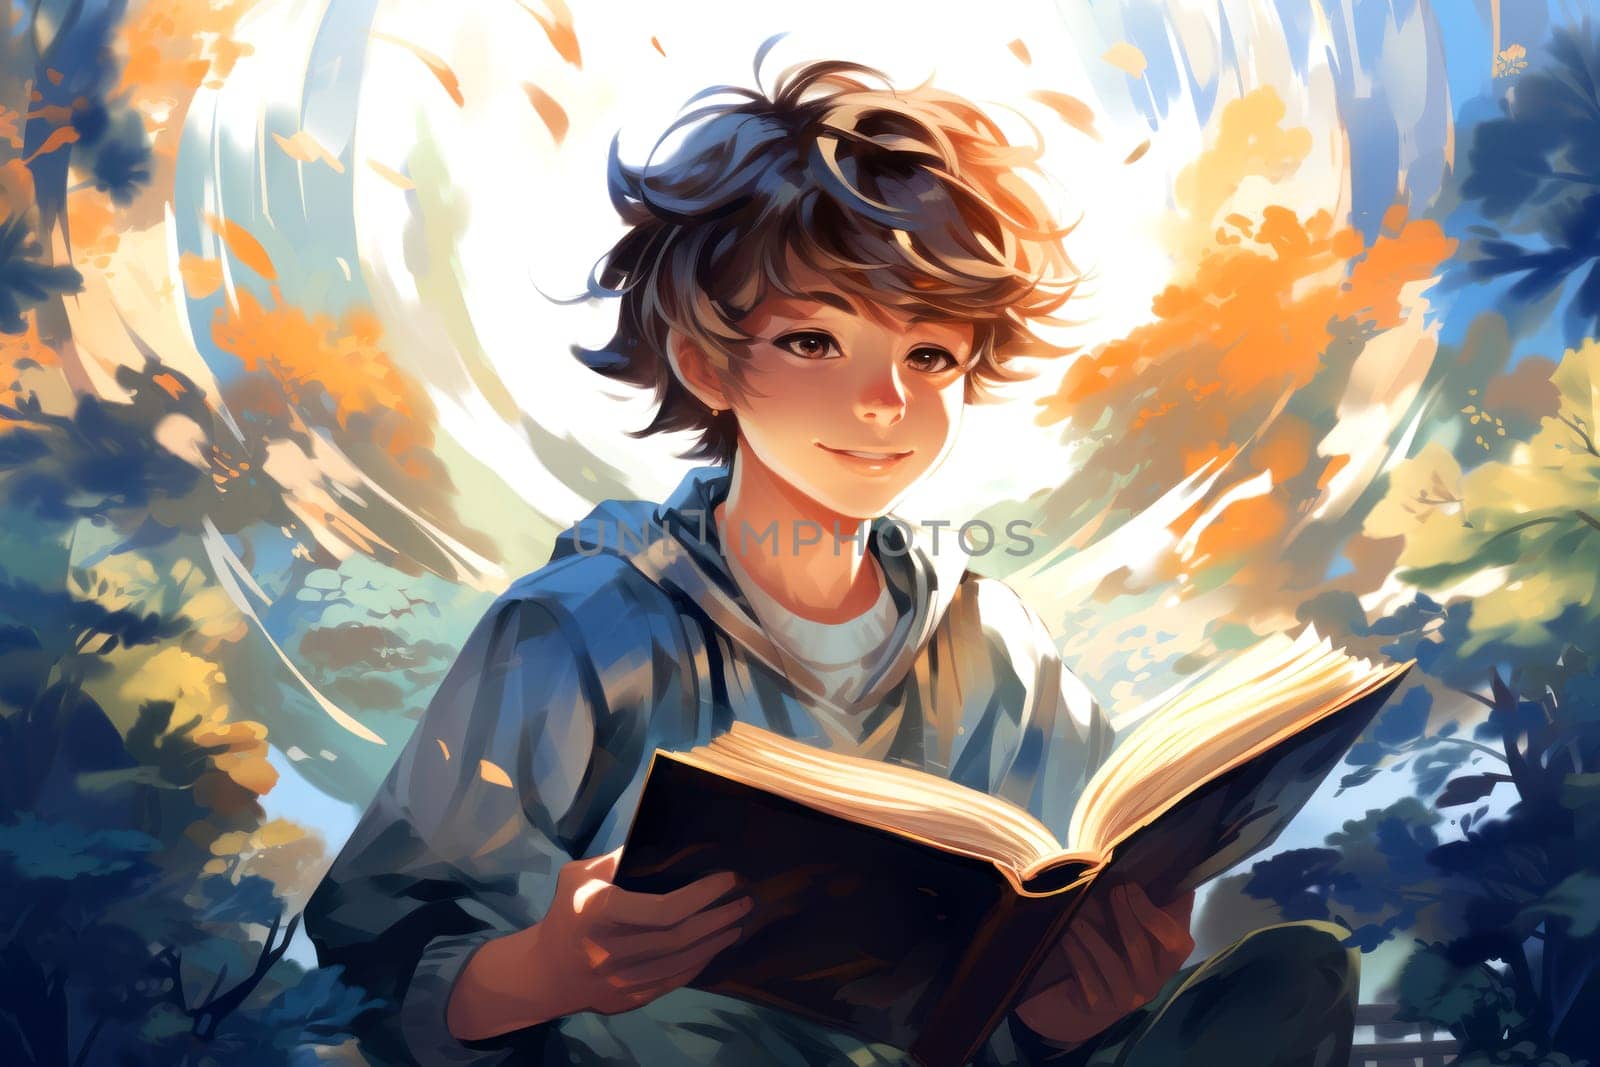 Boy engrossed in book with enchanted forest background